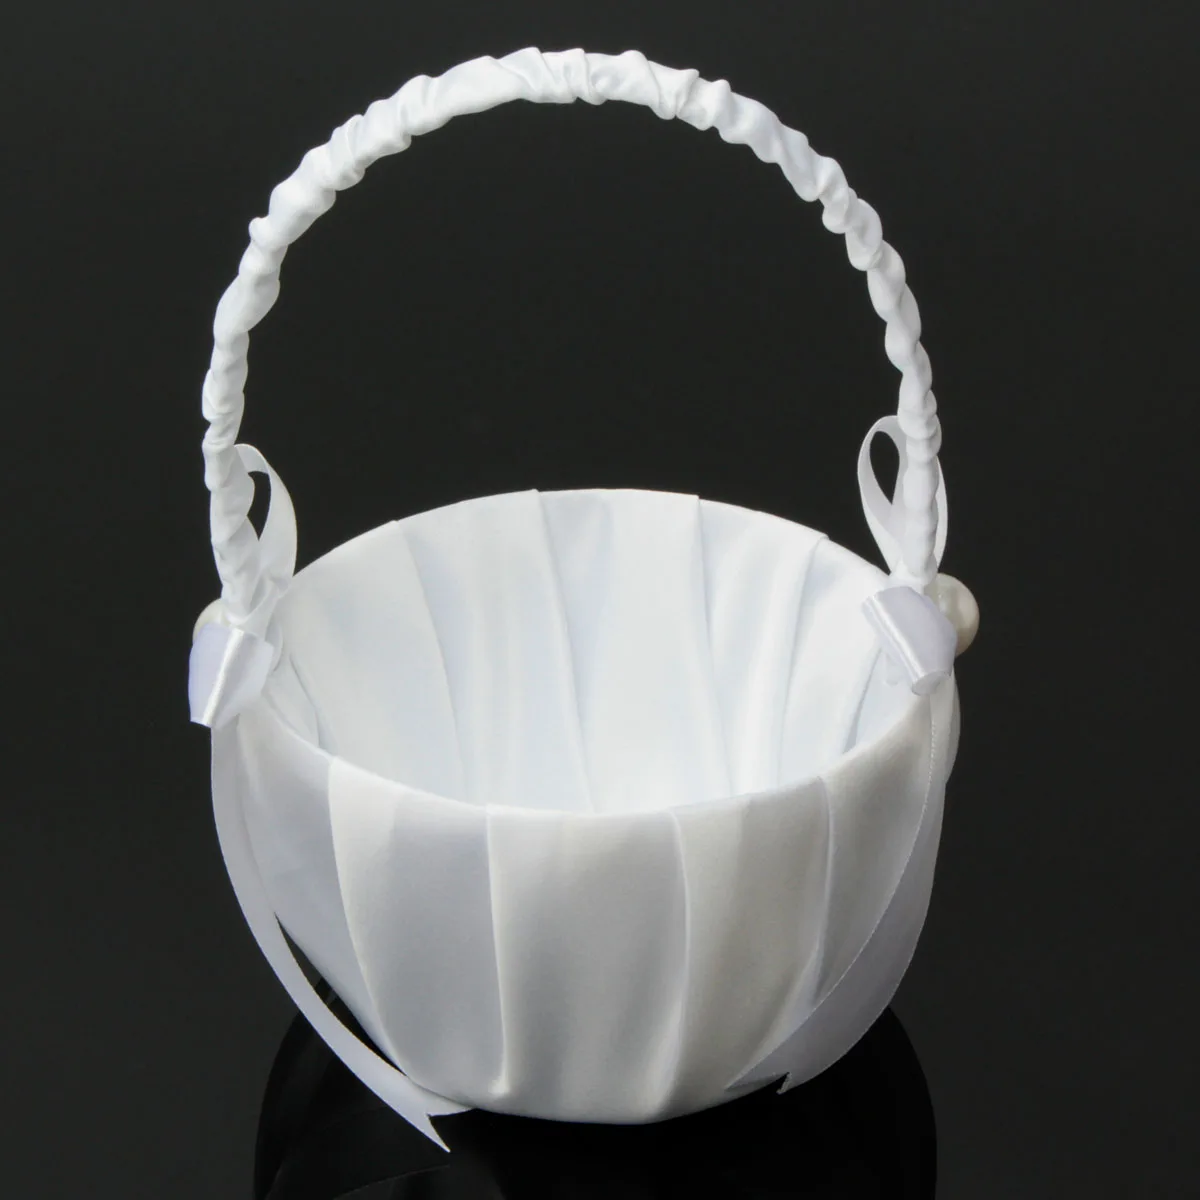 

Wedding Ceremony Party Pearl White Single Flower Girl Baskets Marriage Satin Bowknot Supplies Romantic Rustic Wedding Basket